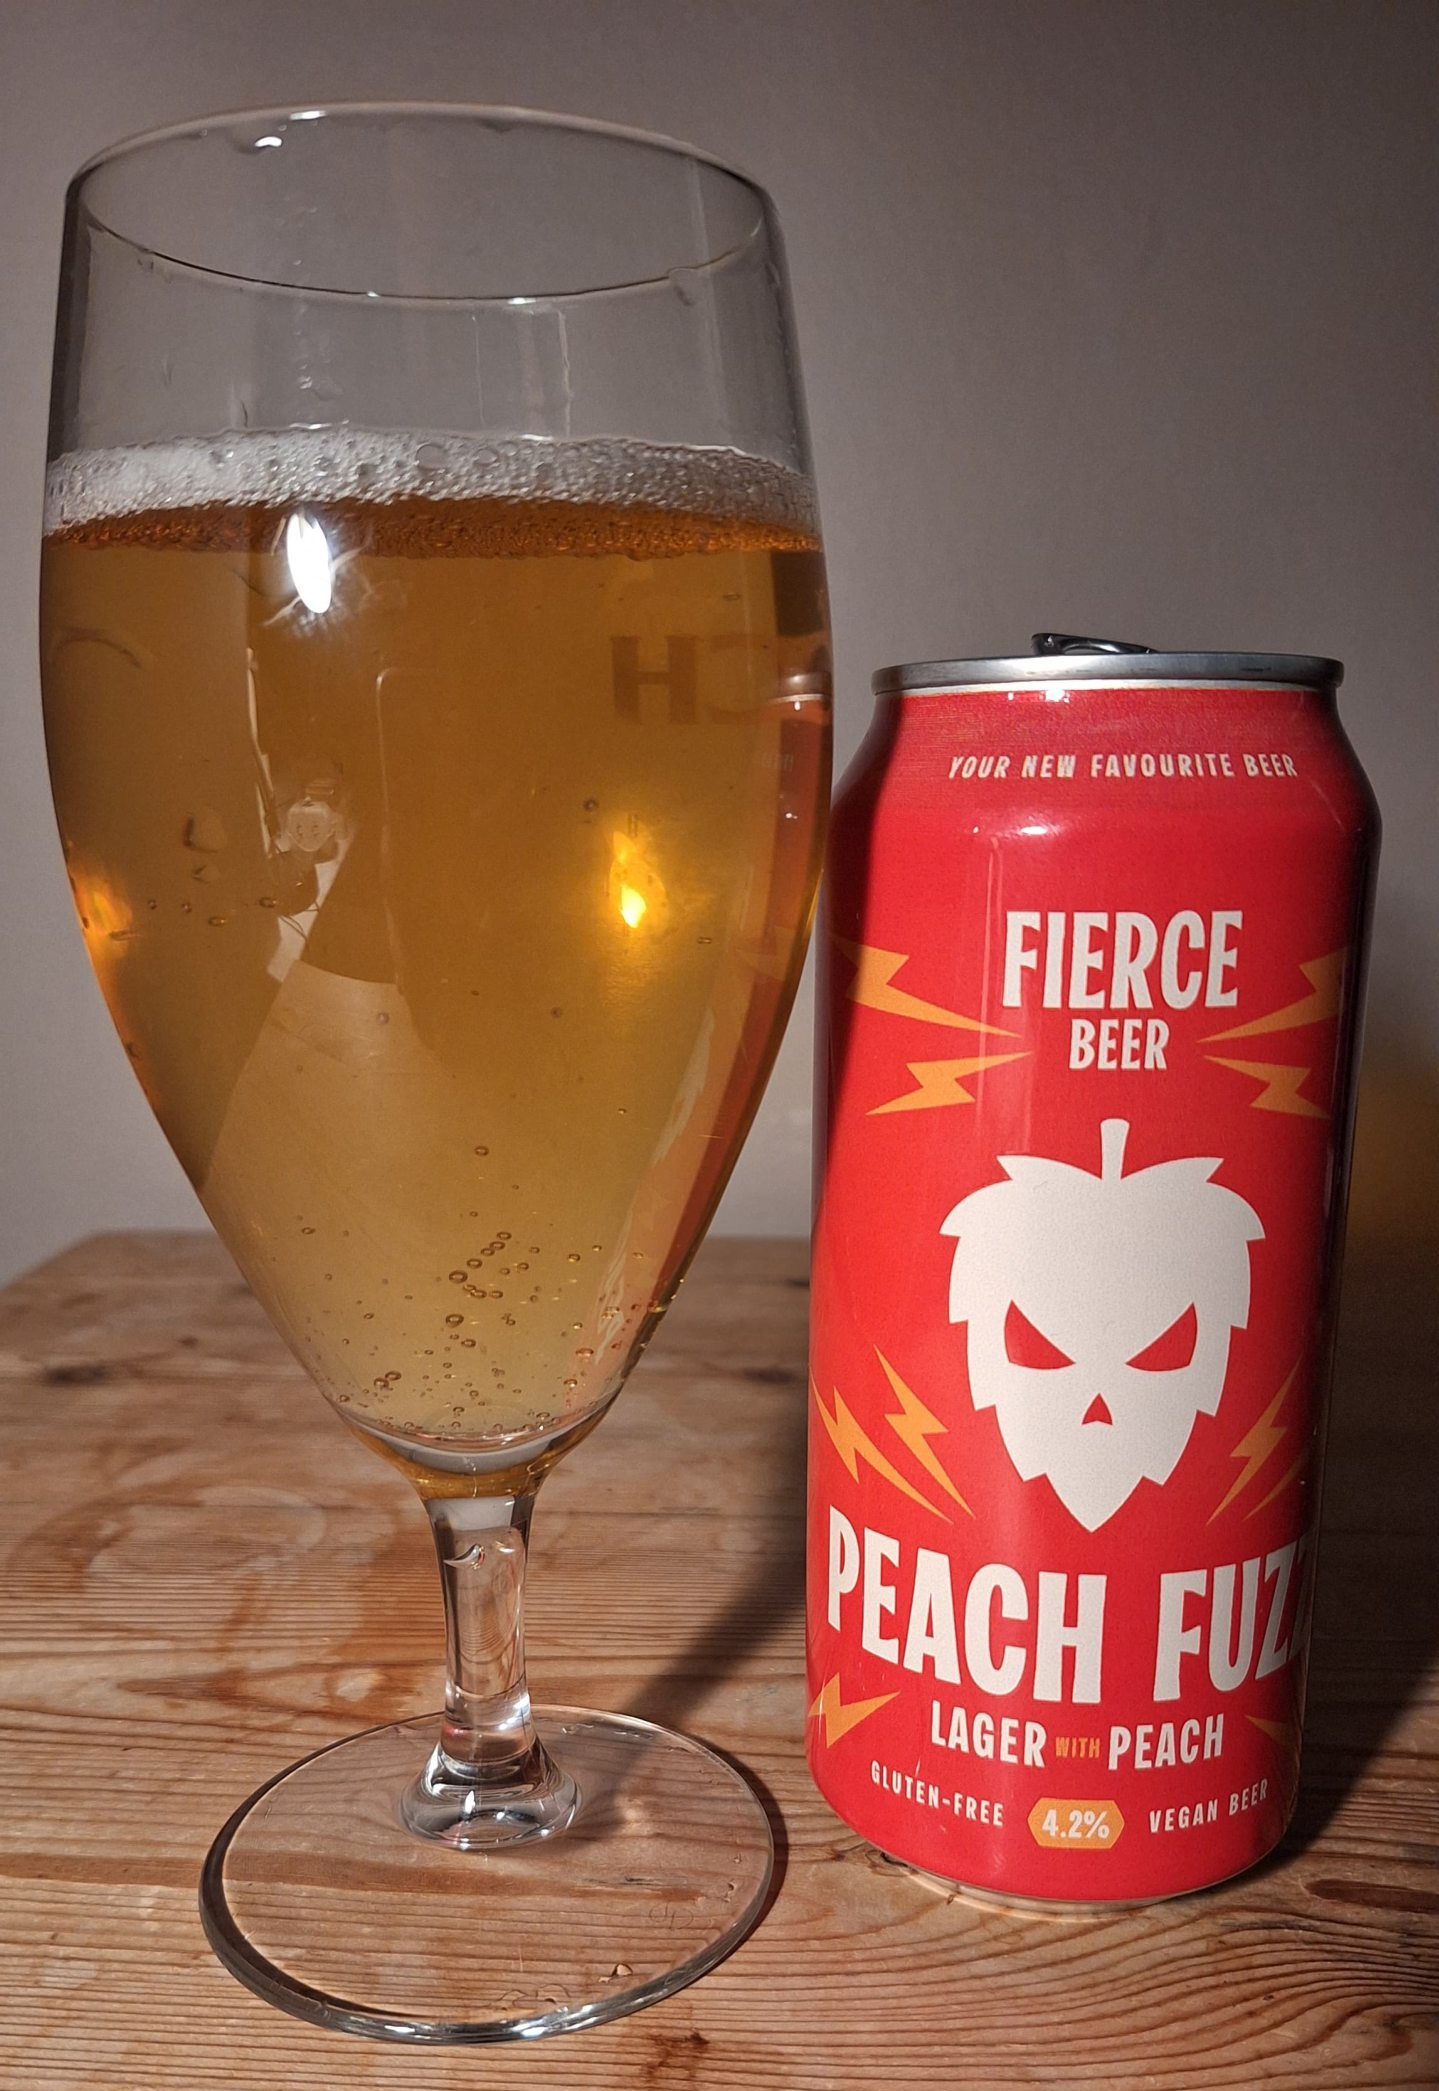 The Peach Fuzz lager from Fierce Beer poured into a glass. 